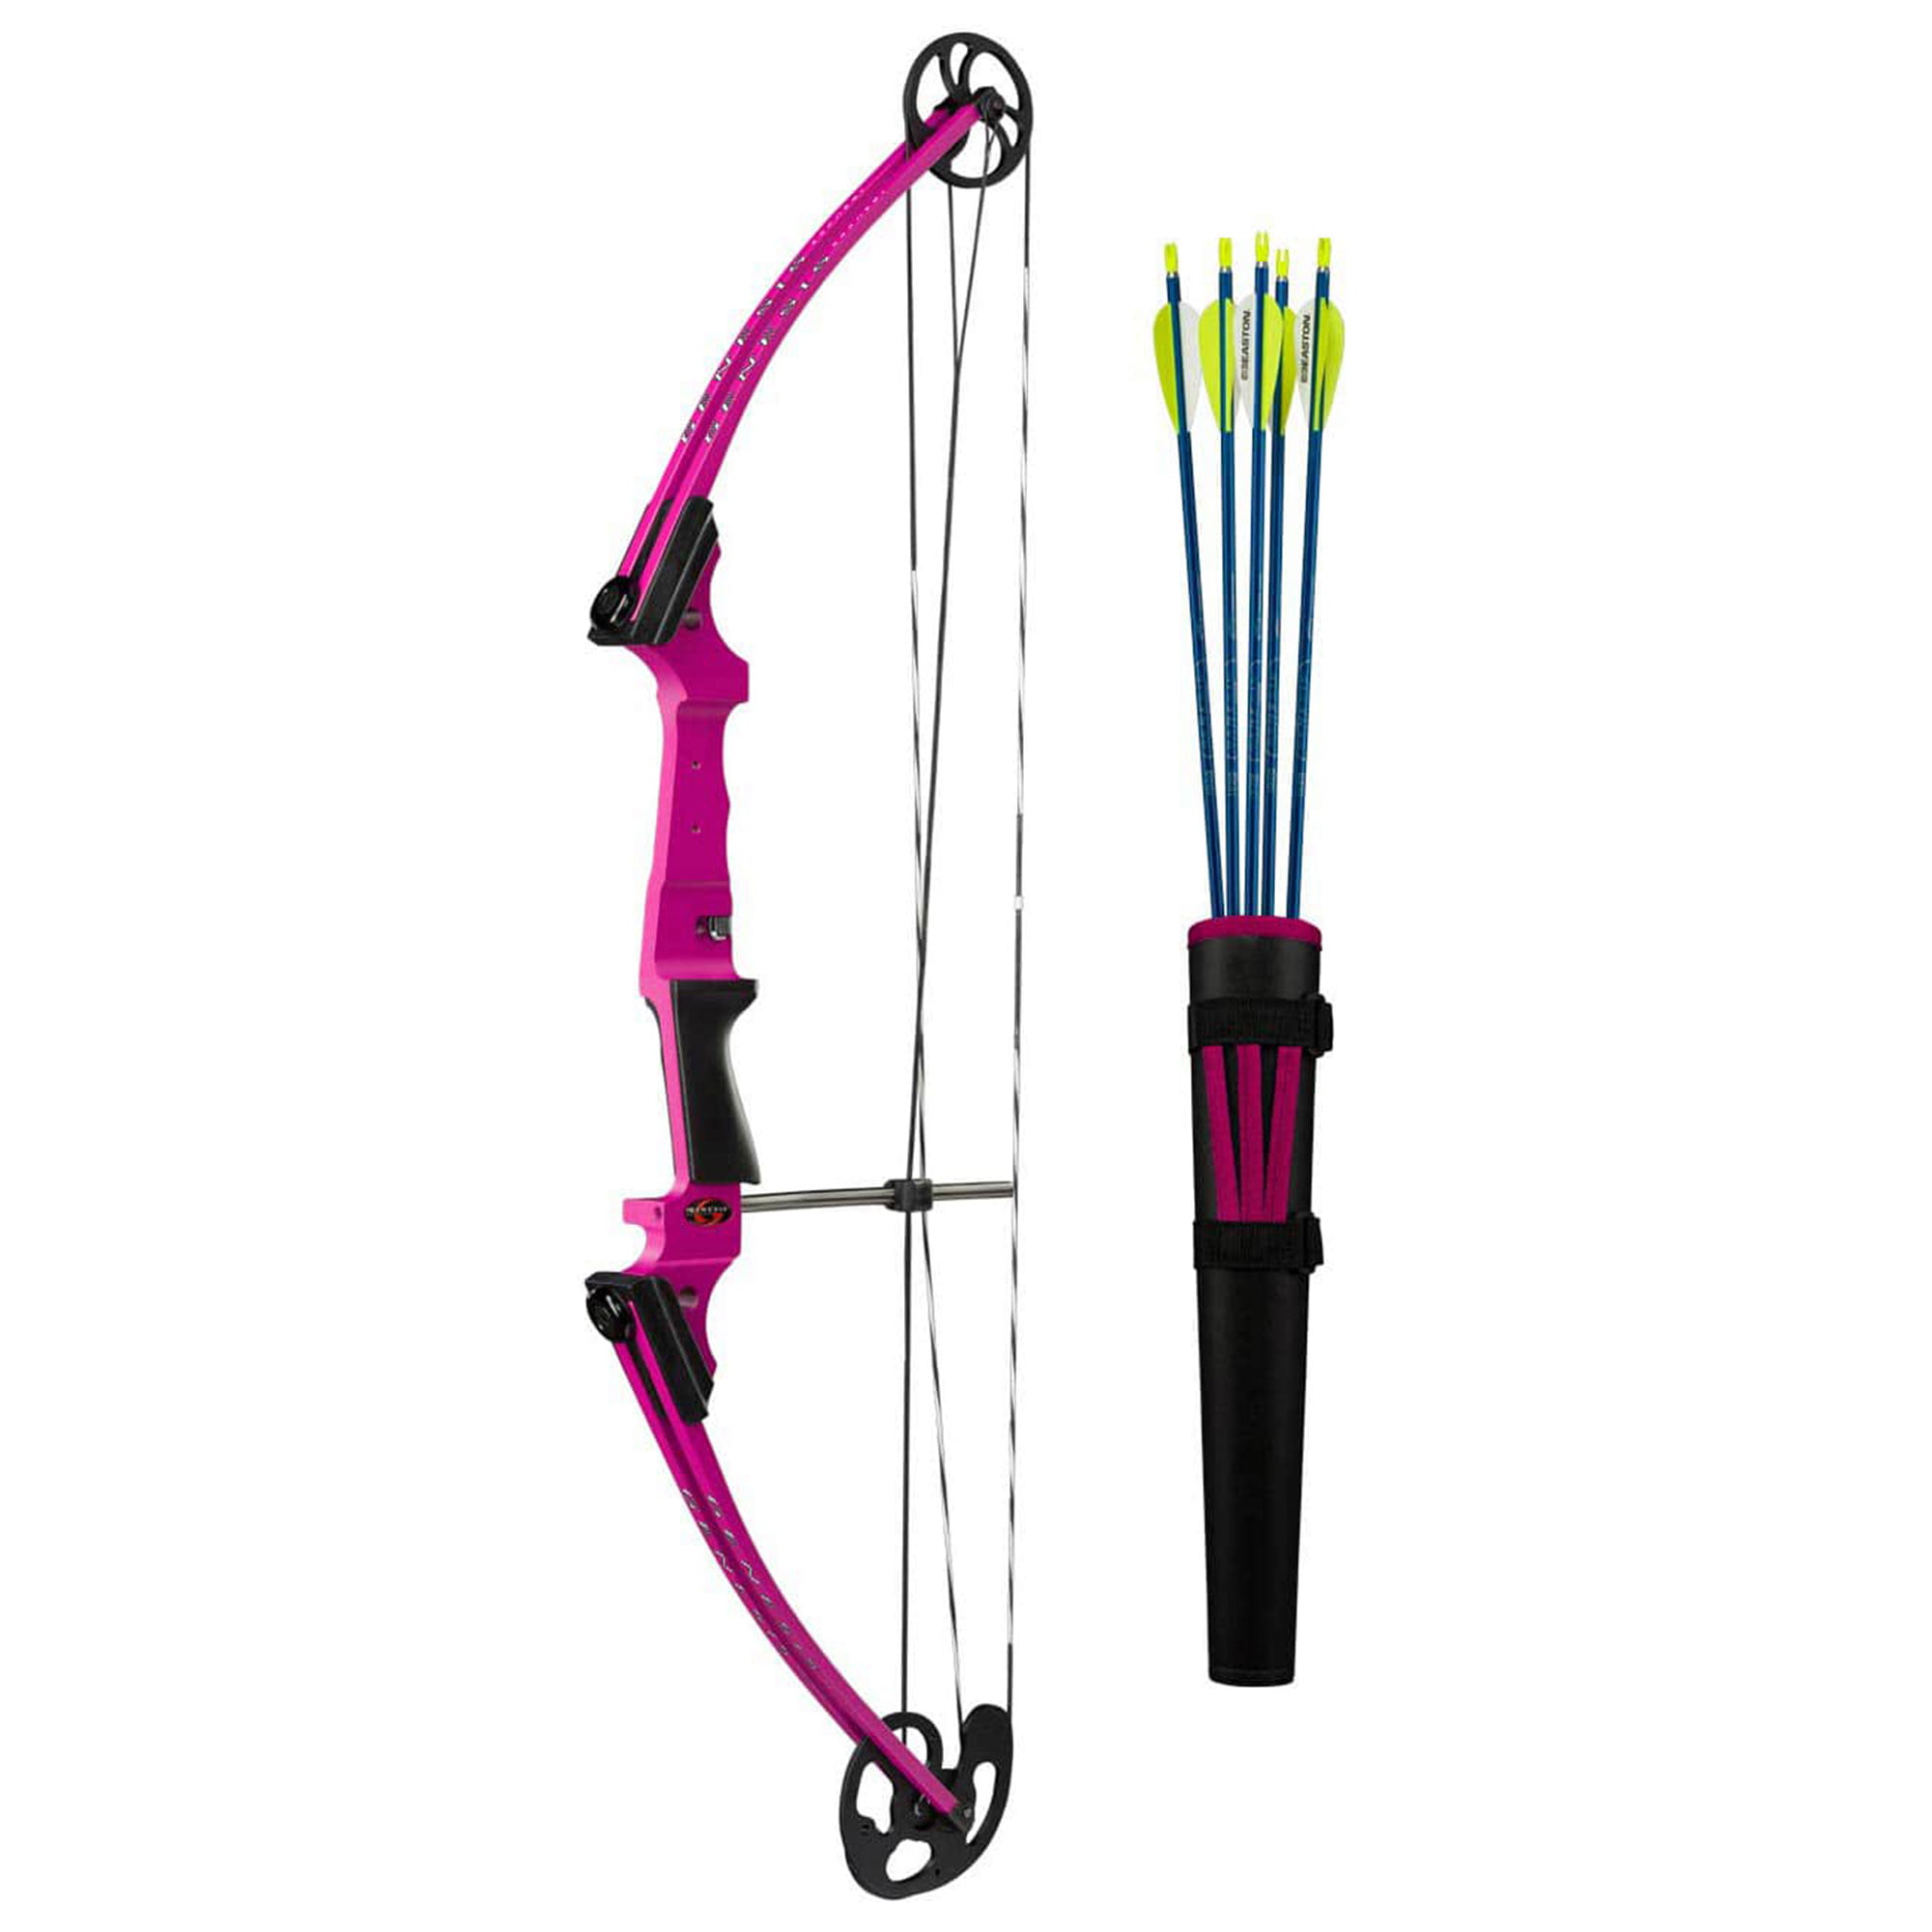 Details about   Hunting Crossbow Bolts Carbon Arrows Easton Vanes Archery Bow Targeting 20 inch 